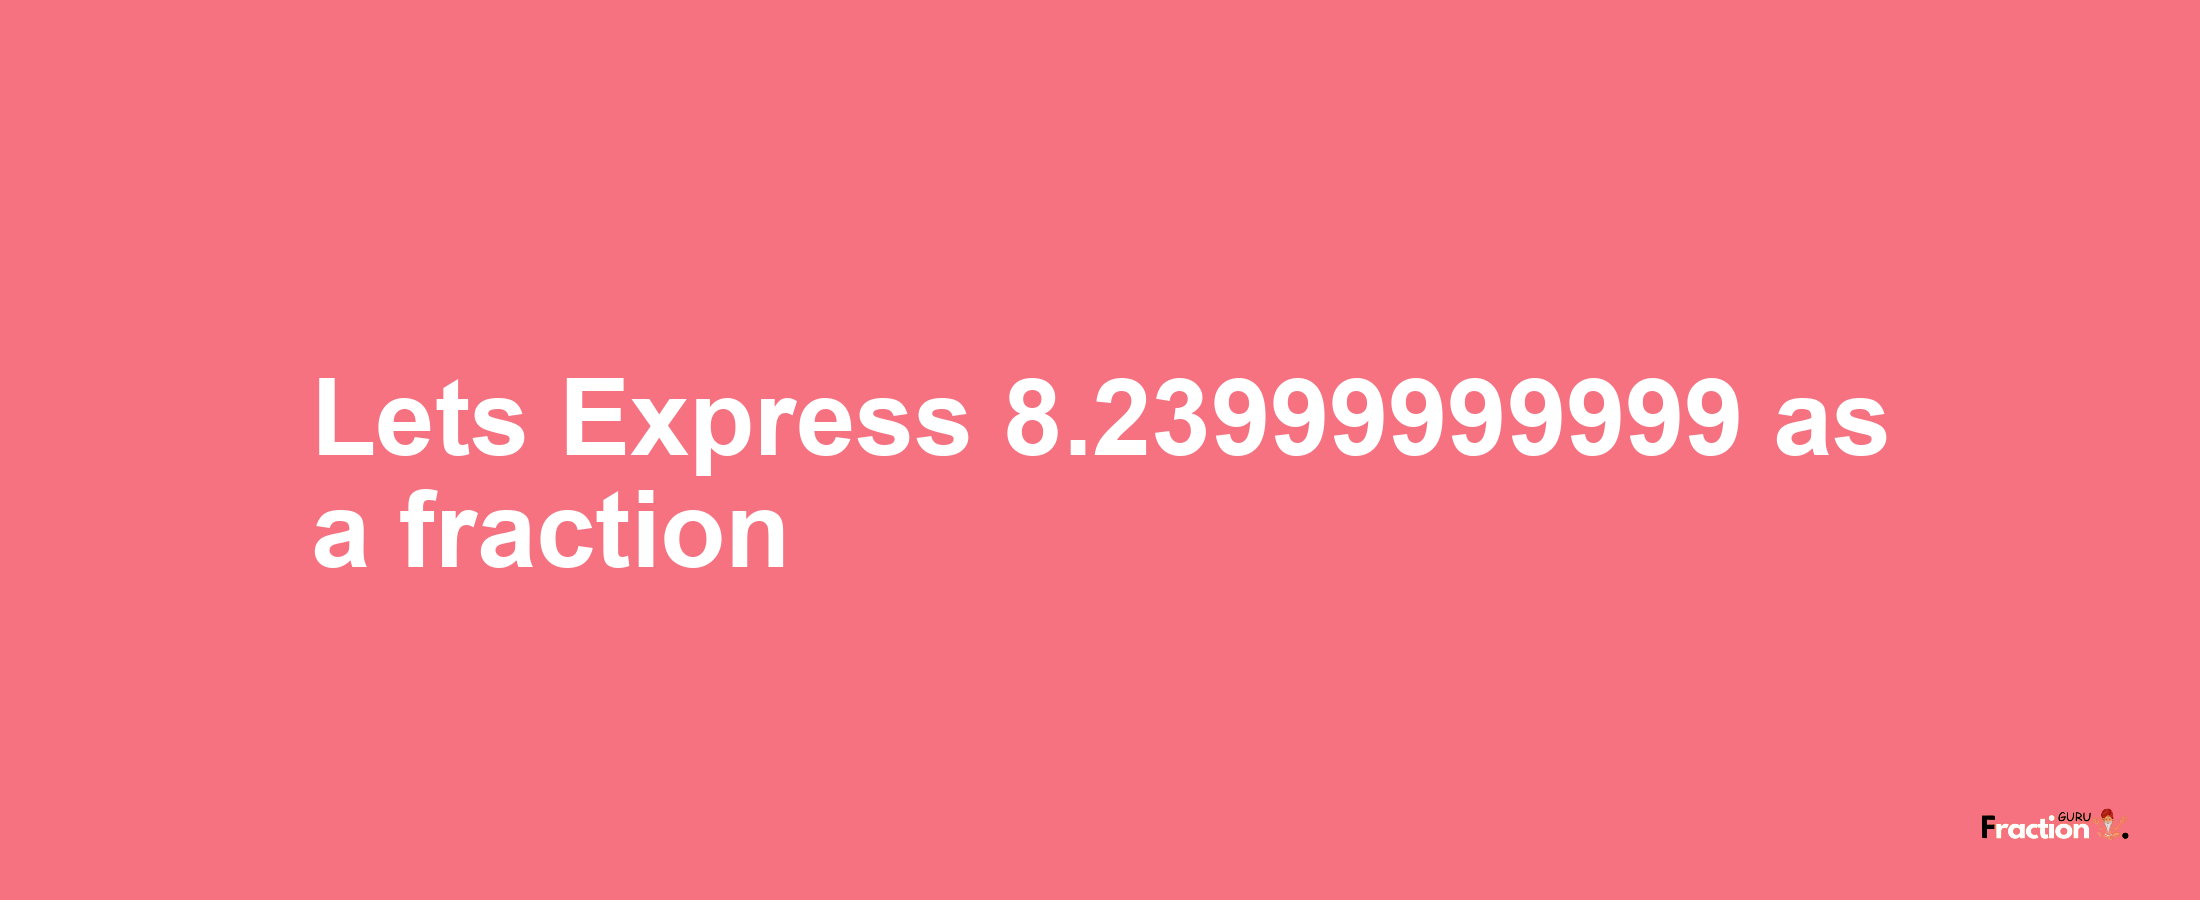 Lets Express 8.23999999999 as afraction